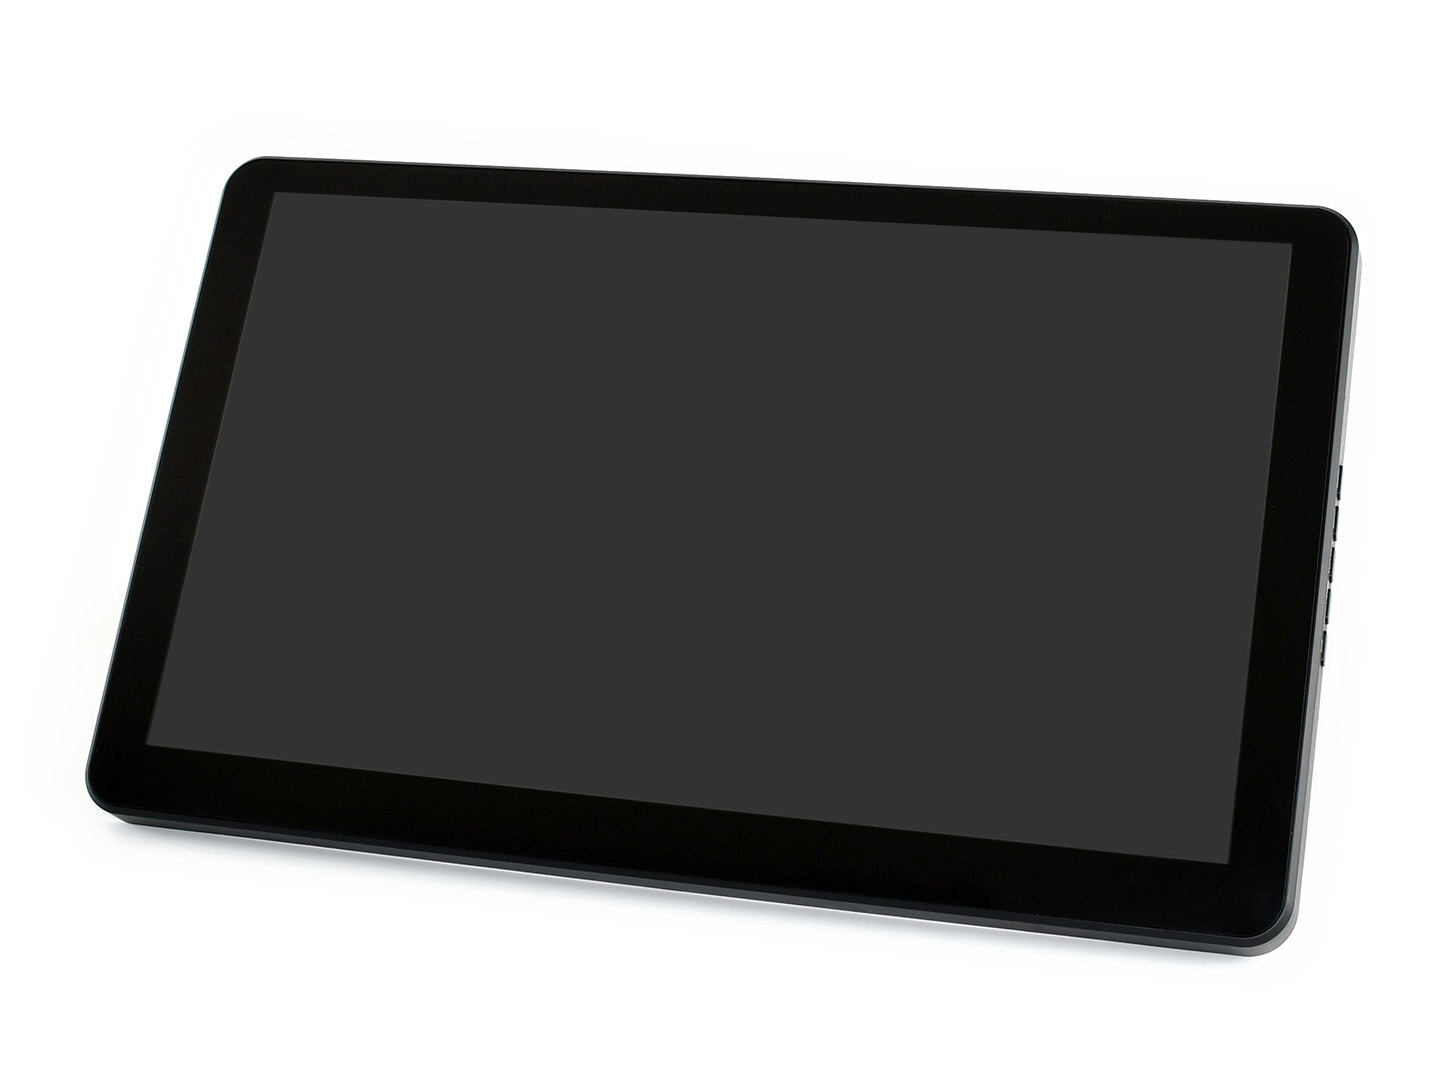 Buy Waveshare 15.6inch Capacitive Touch LCD (H) with Case Online in India  at